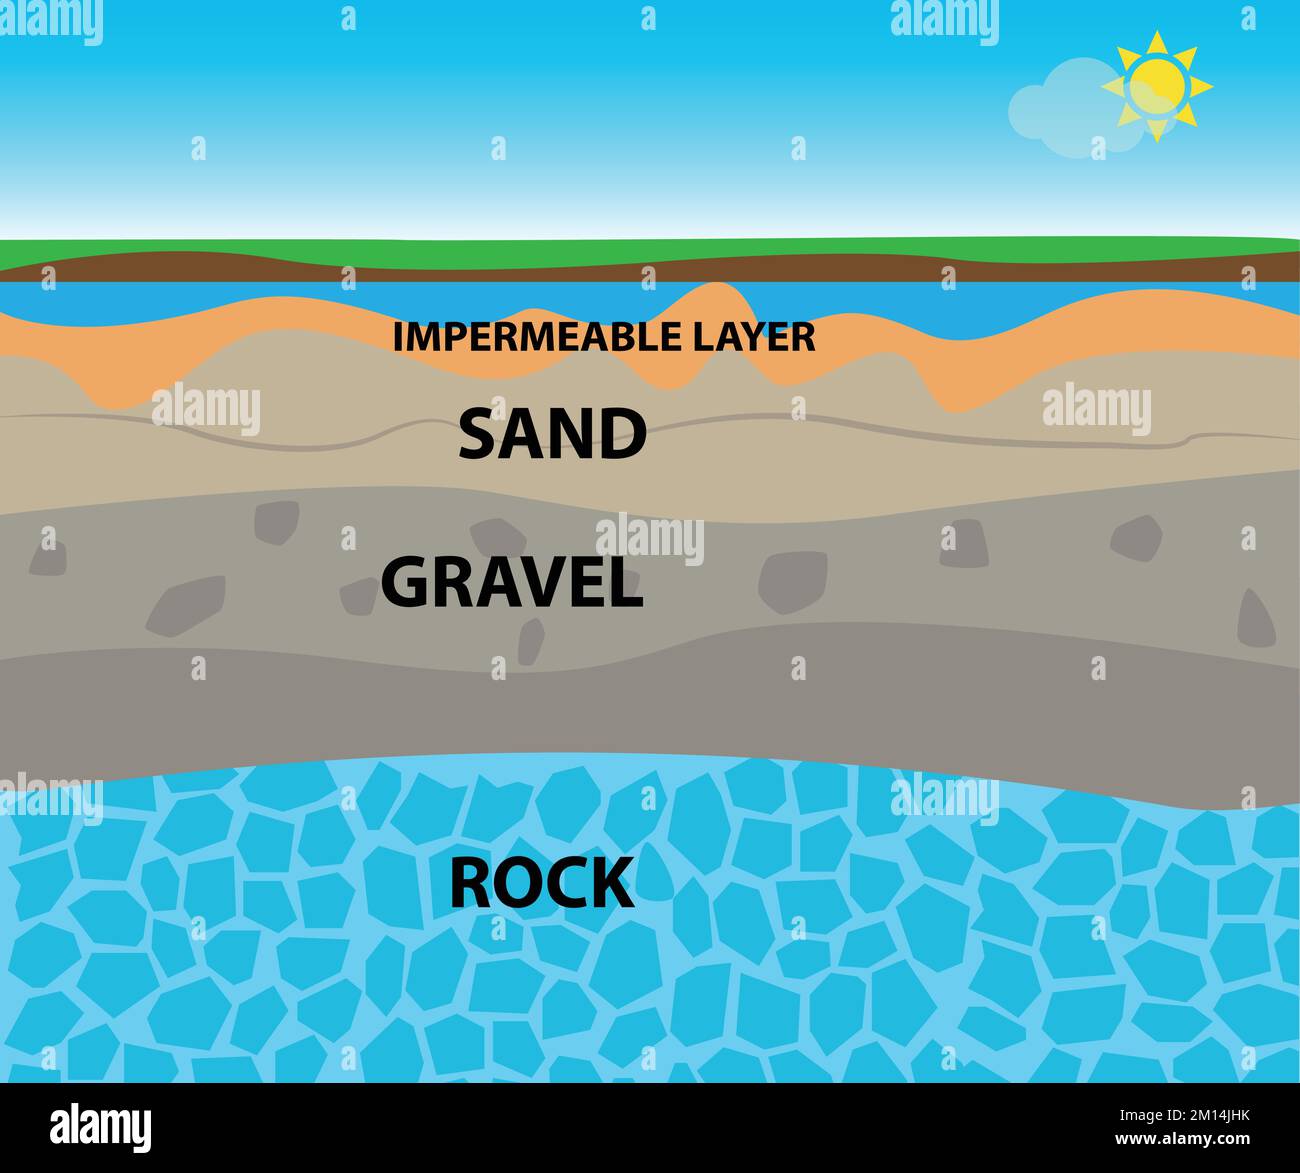 Soil layers with sand, gravel, rock, impermeable layer and ground water aquifer Stock Vector